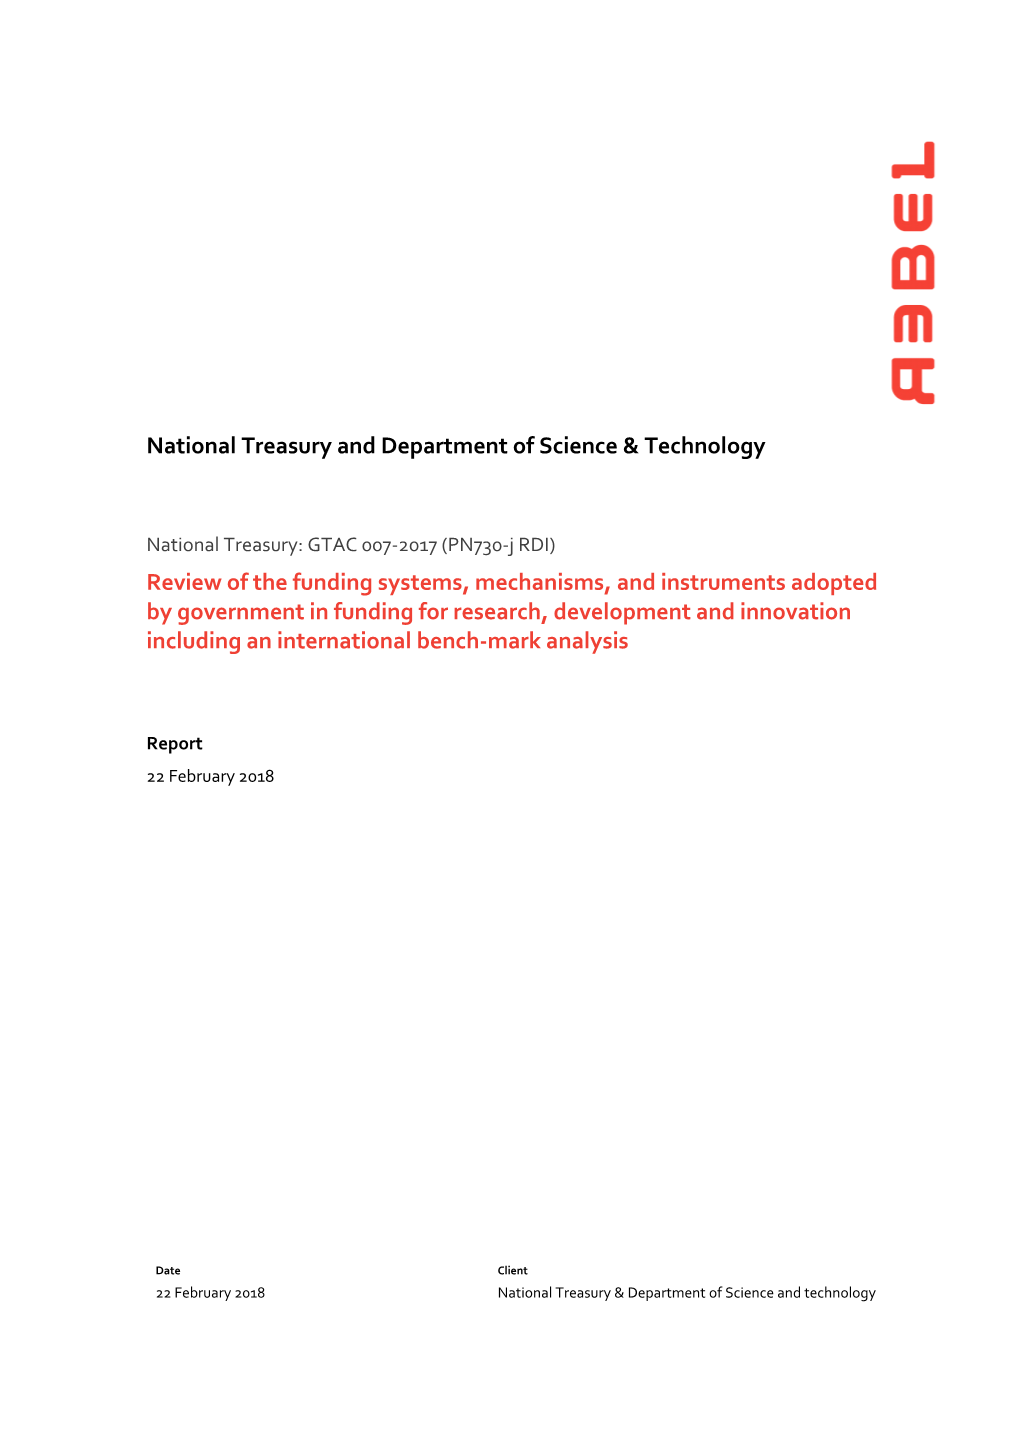 National Treasury and Department of Science & Technology Review Of